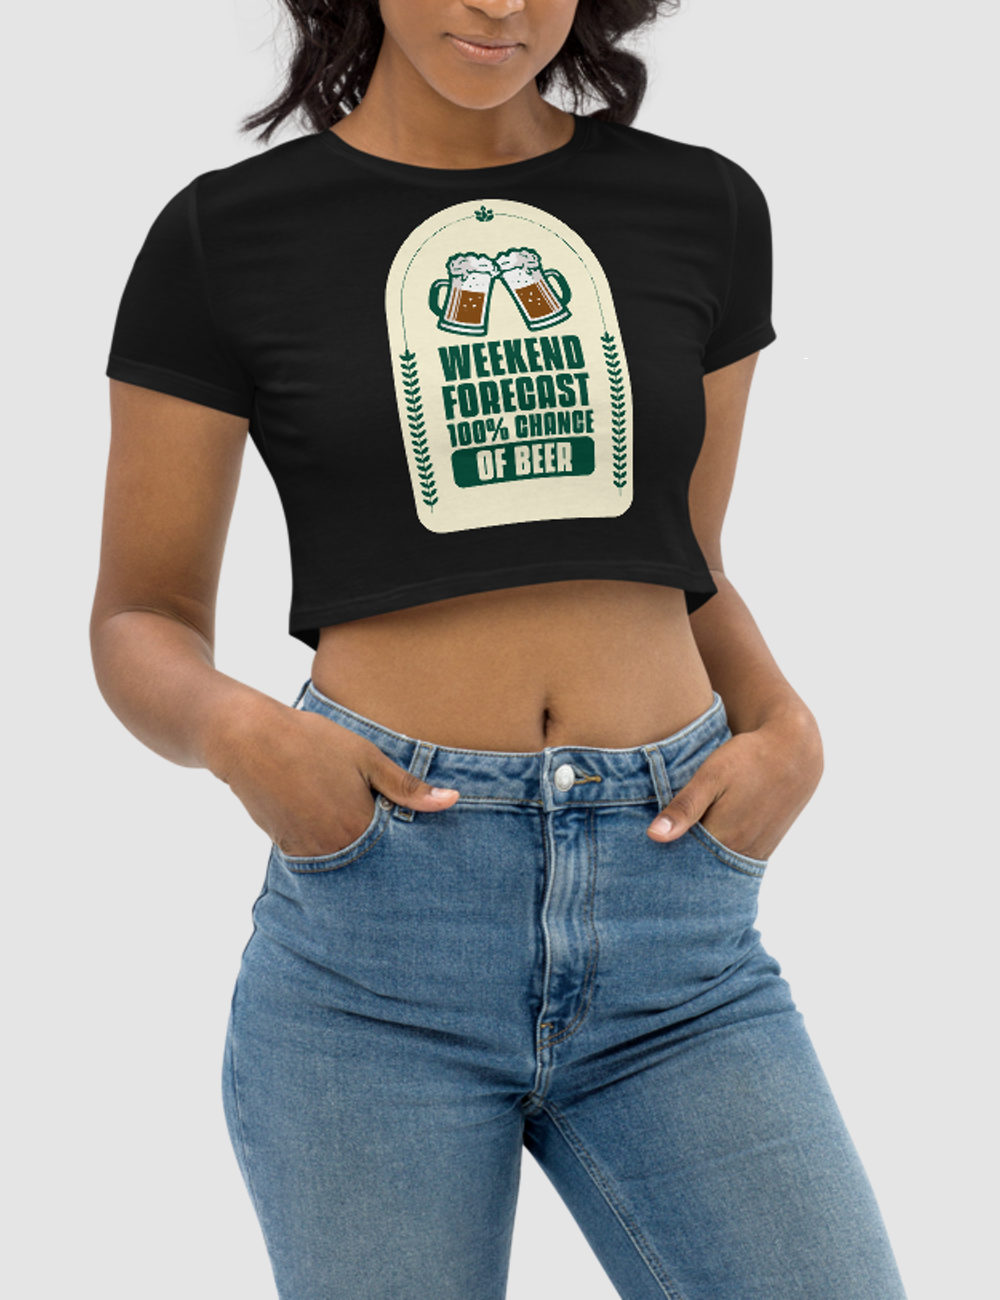 Beer Forecast Women's Fitted Crop Top T-Shirt OniTakai